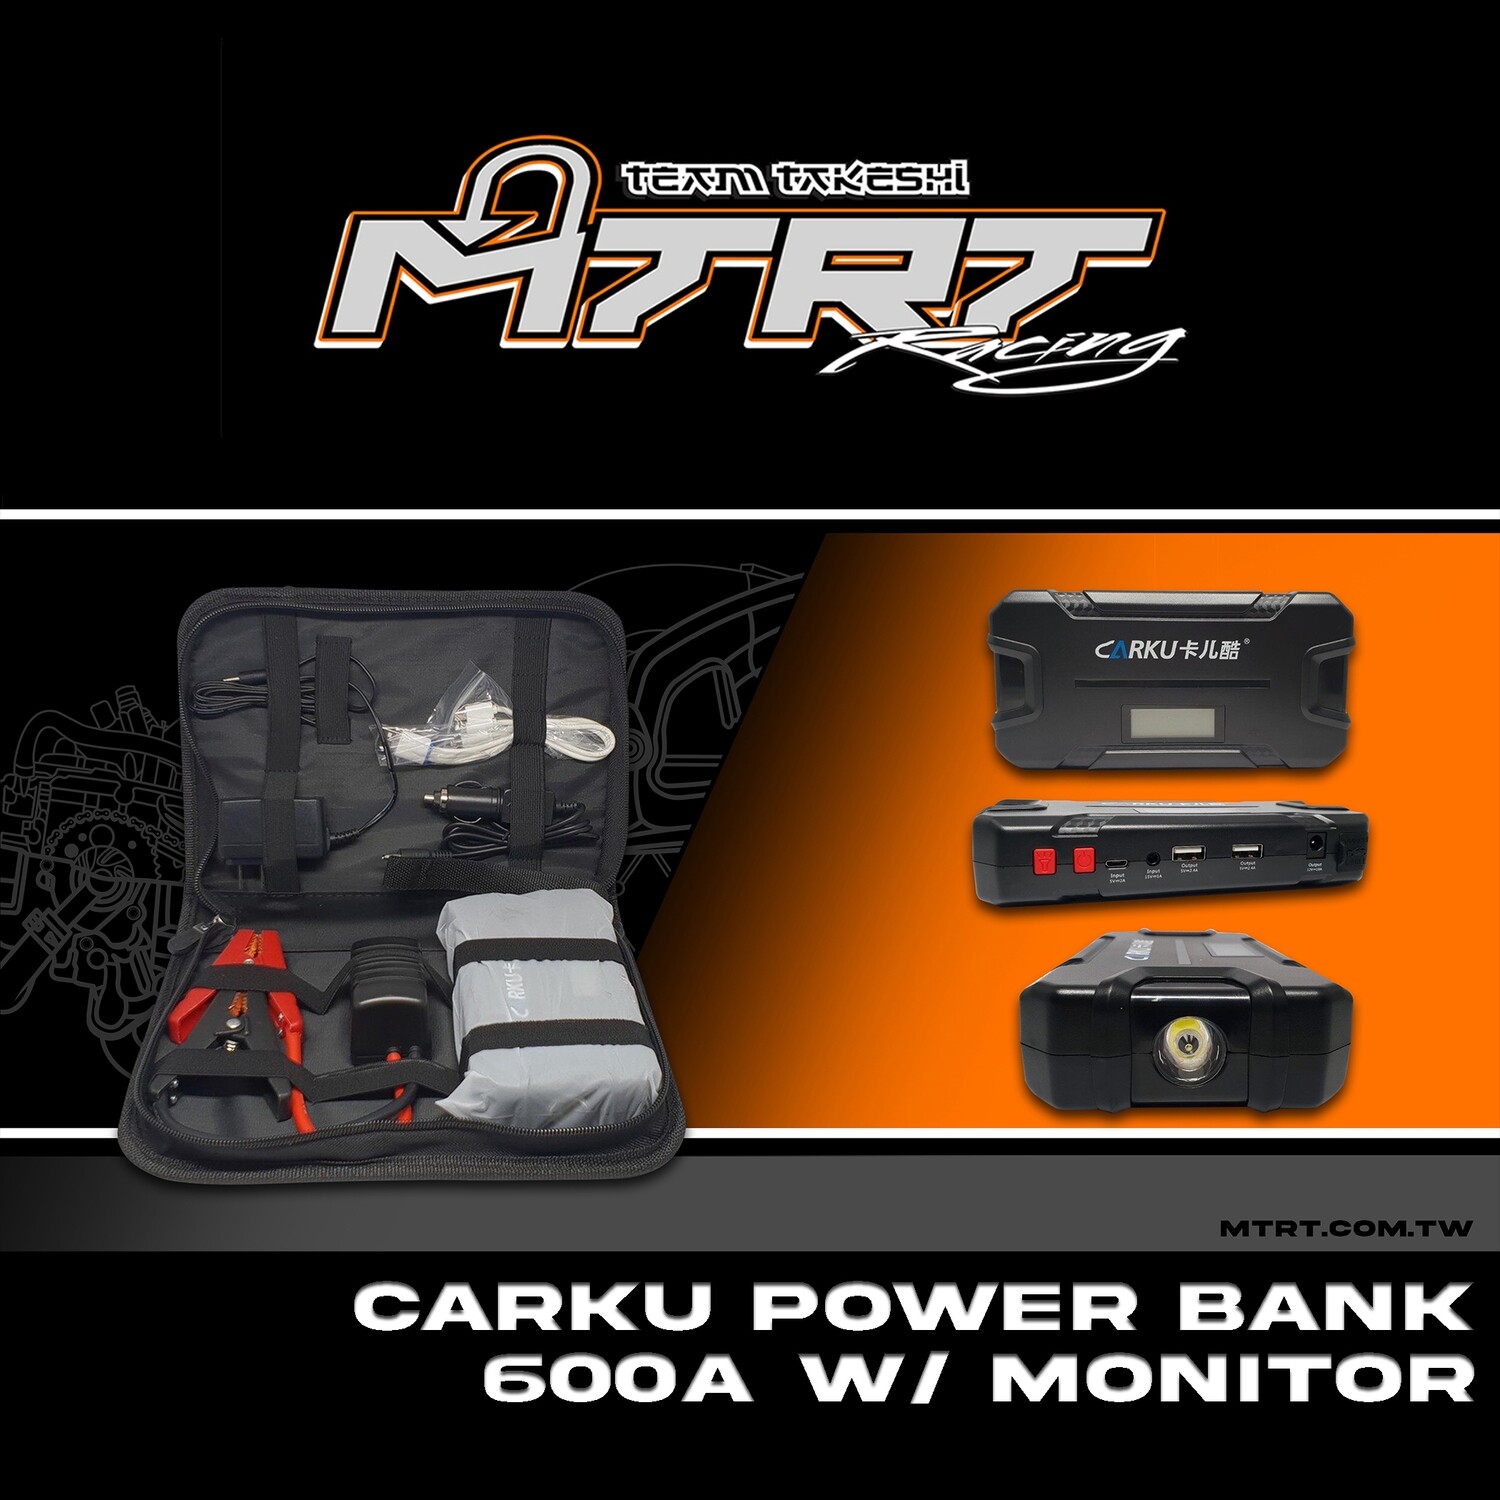 CARKU POWER BANK 600A WITH MONITOR